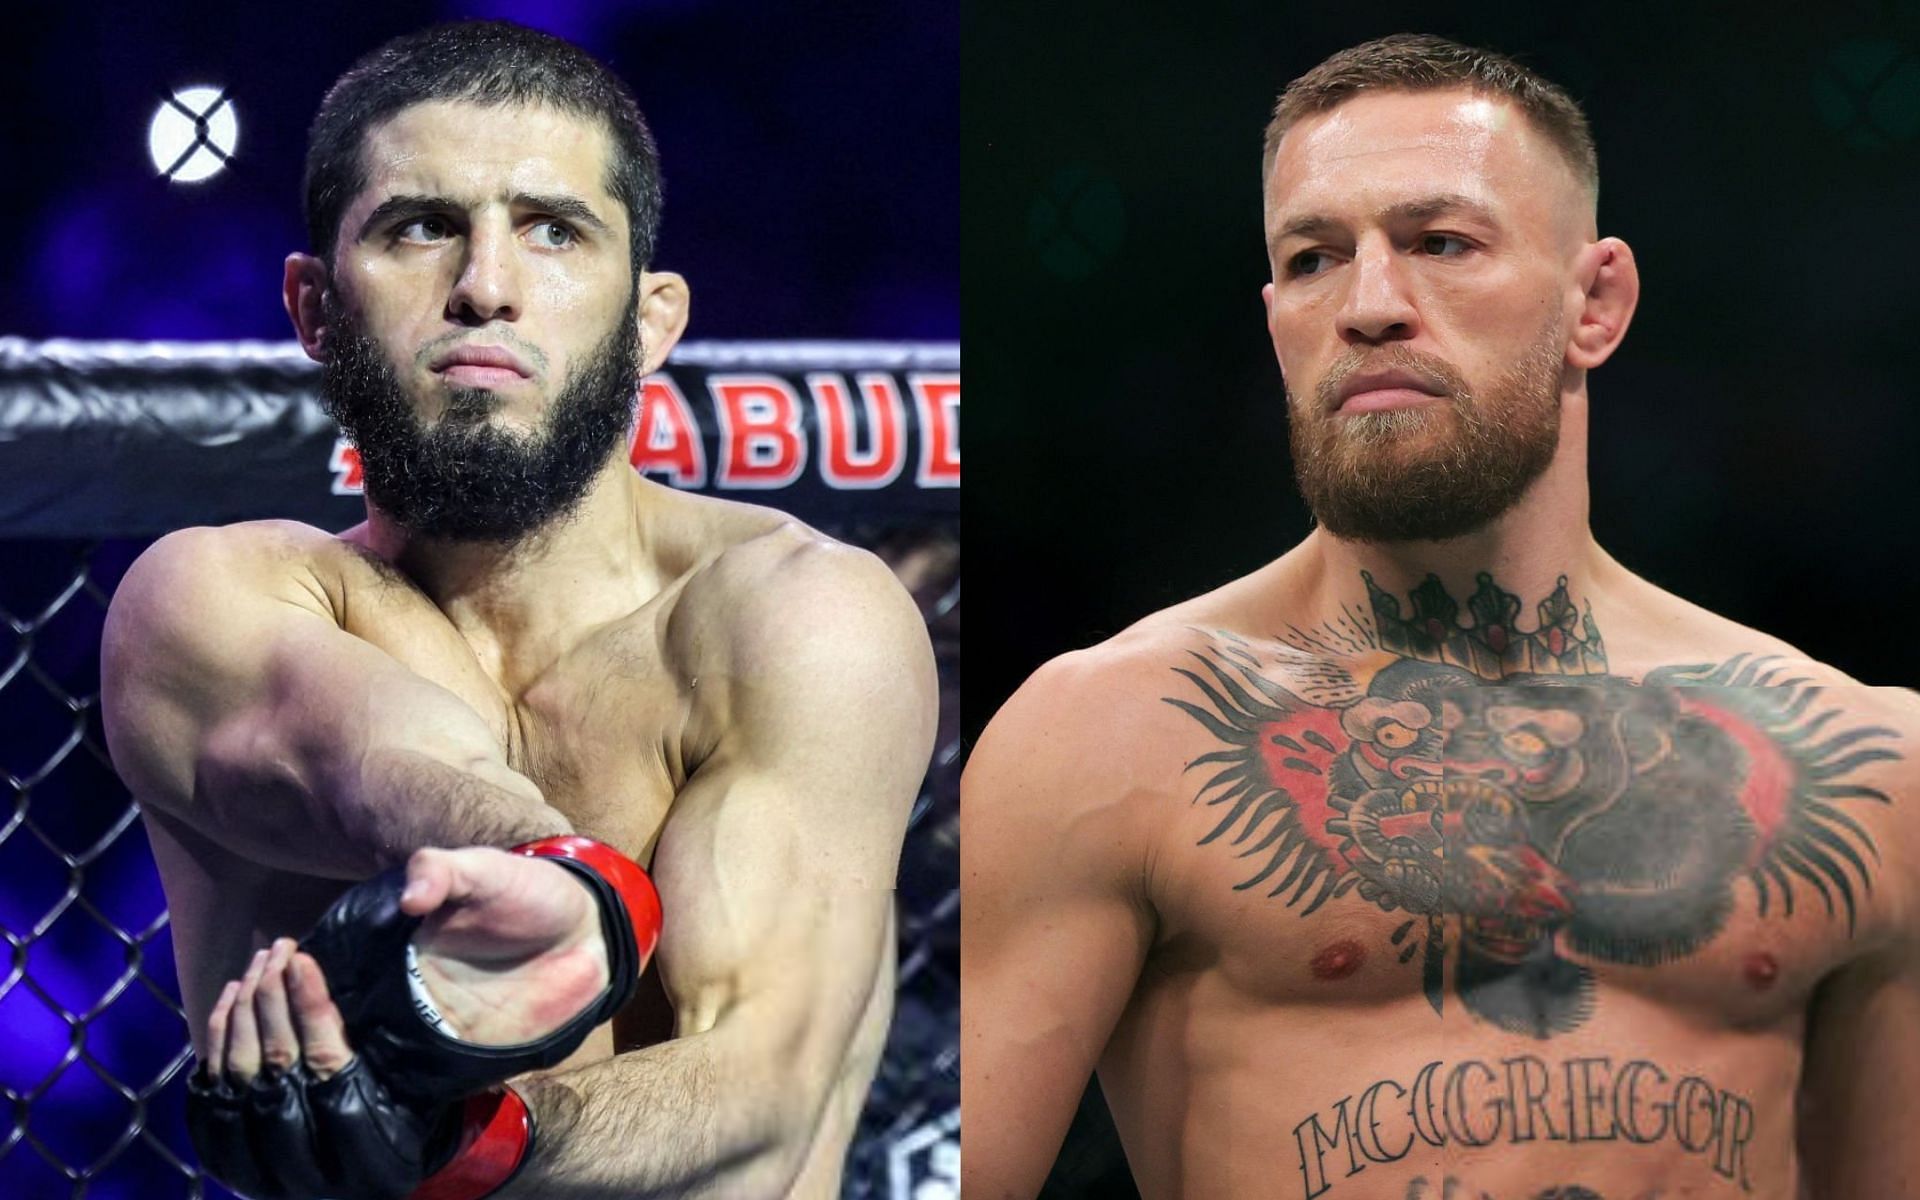 Islam Makhachev (left) and Conor McGregor (right) [Images Courtesy: @GettyImages]